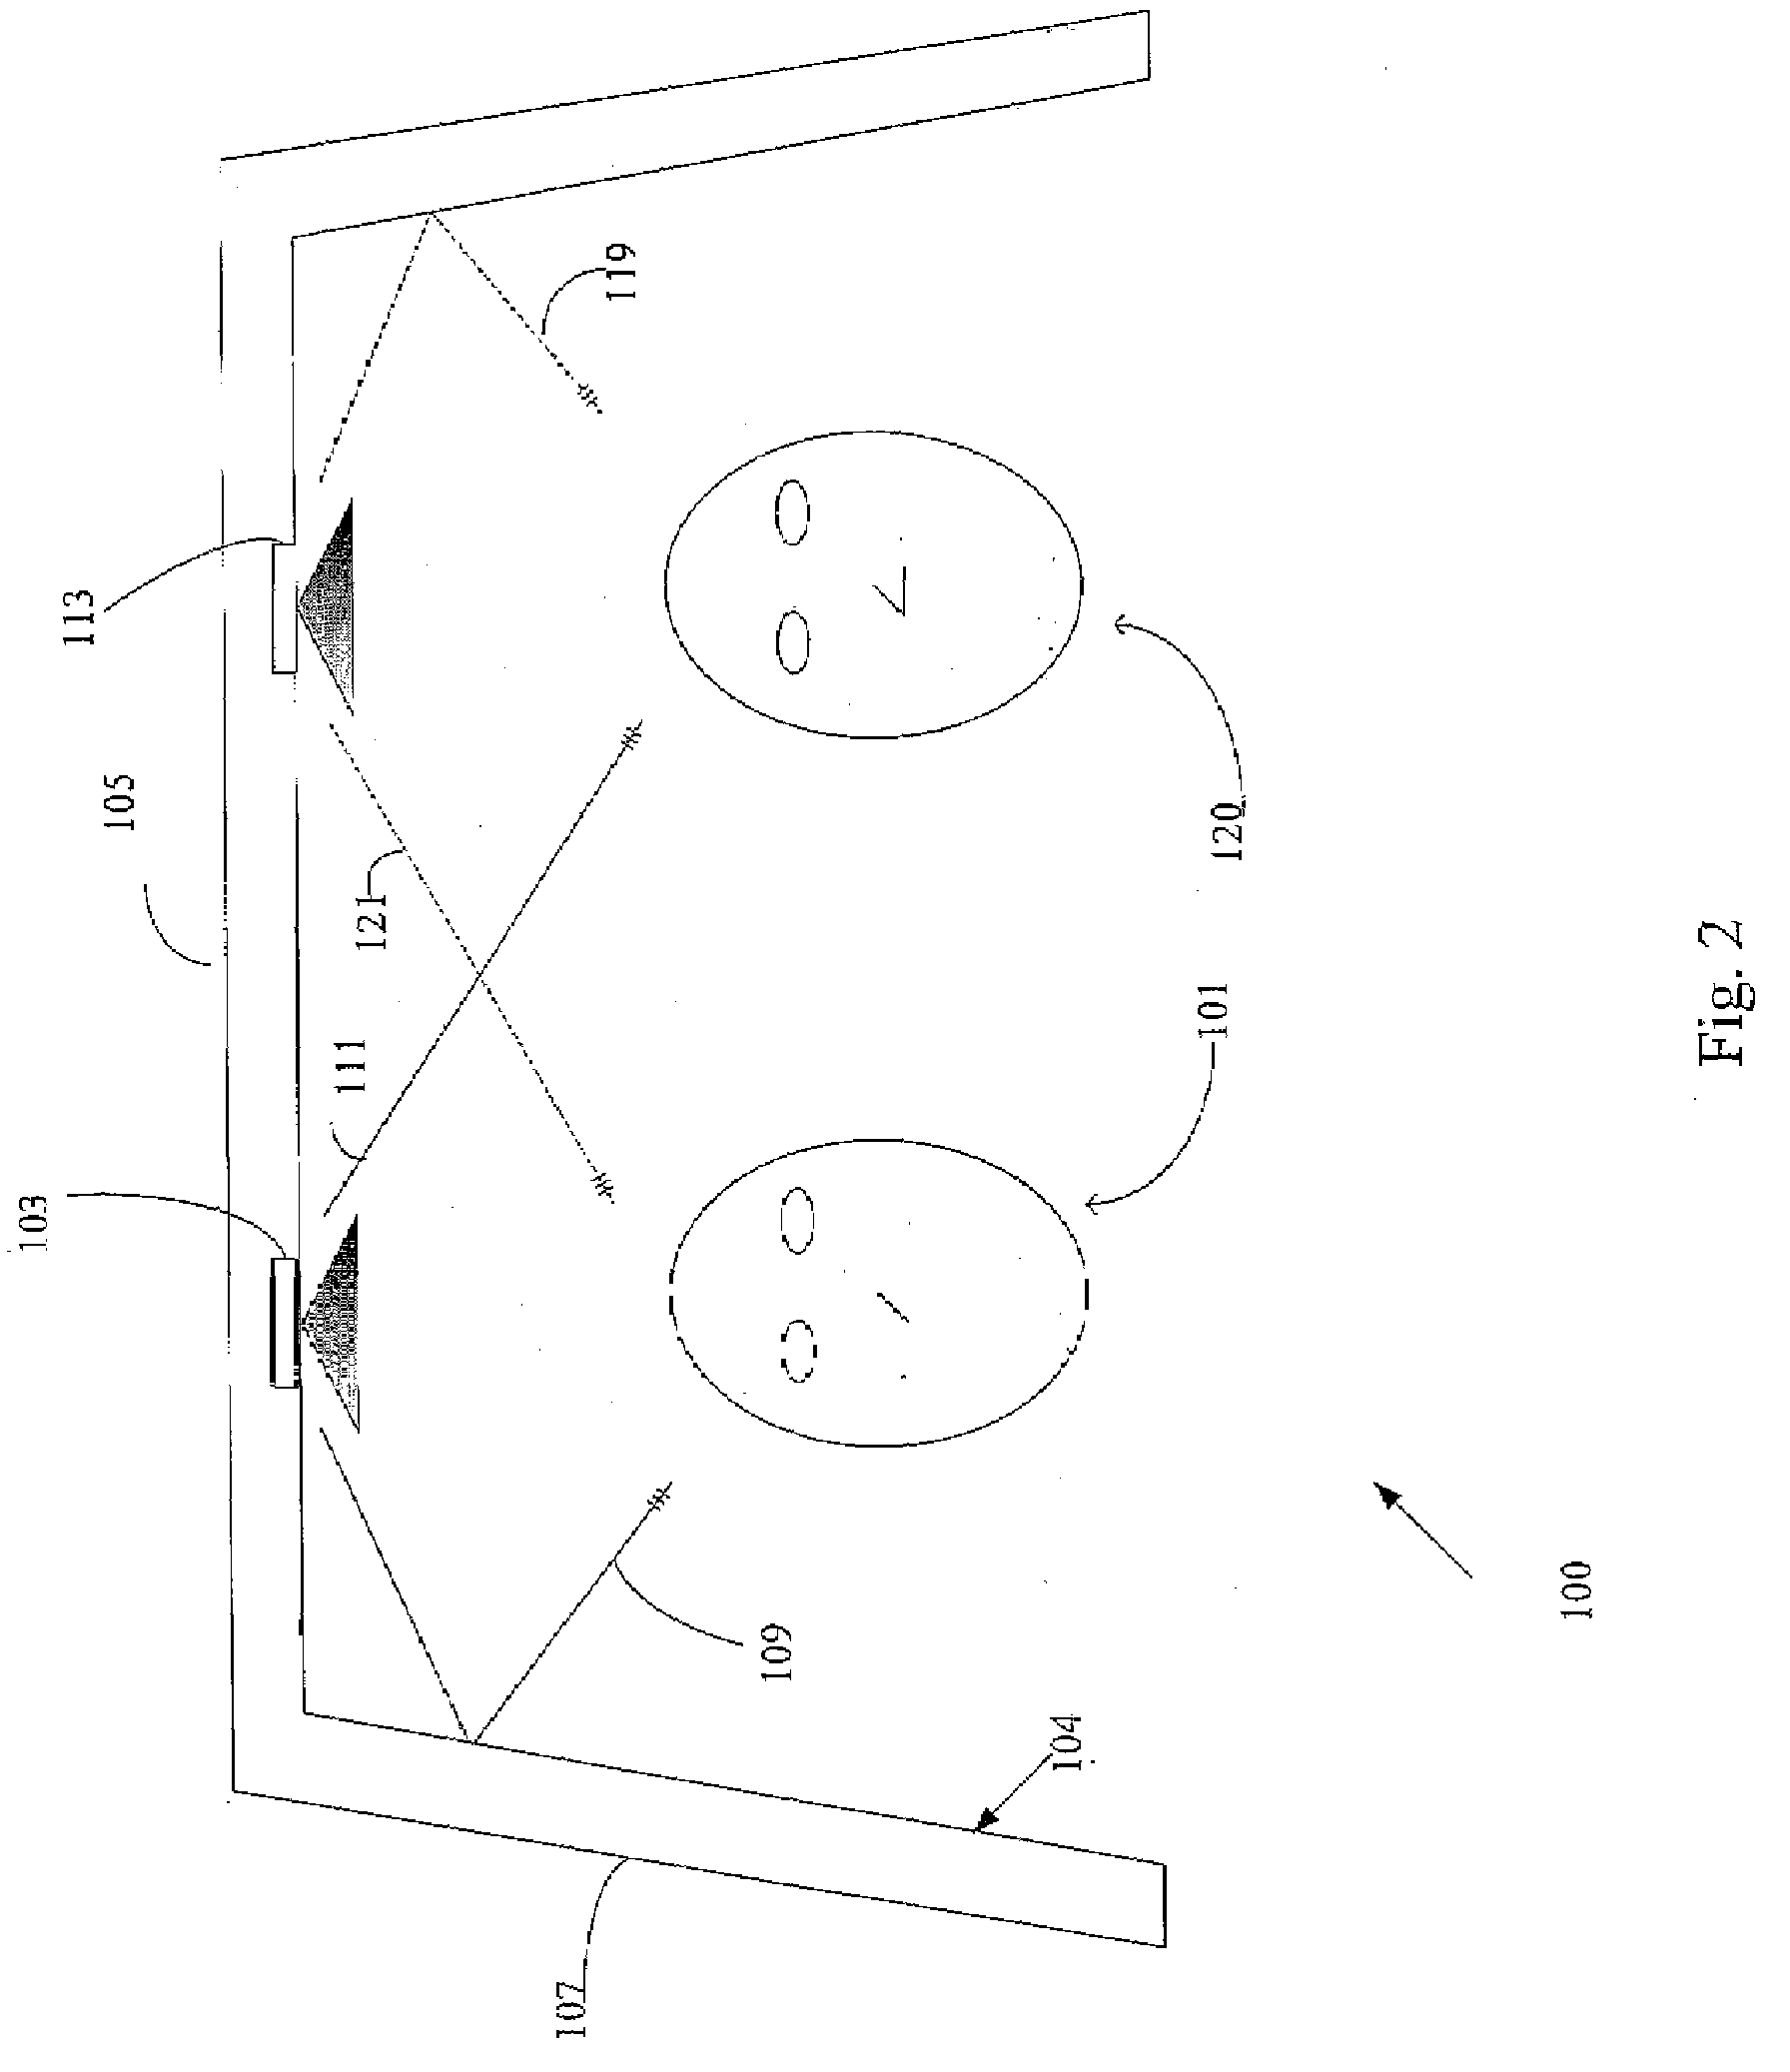 Directional loudspeaker to reduce direct sound